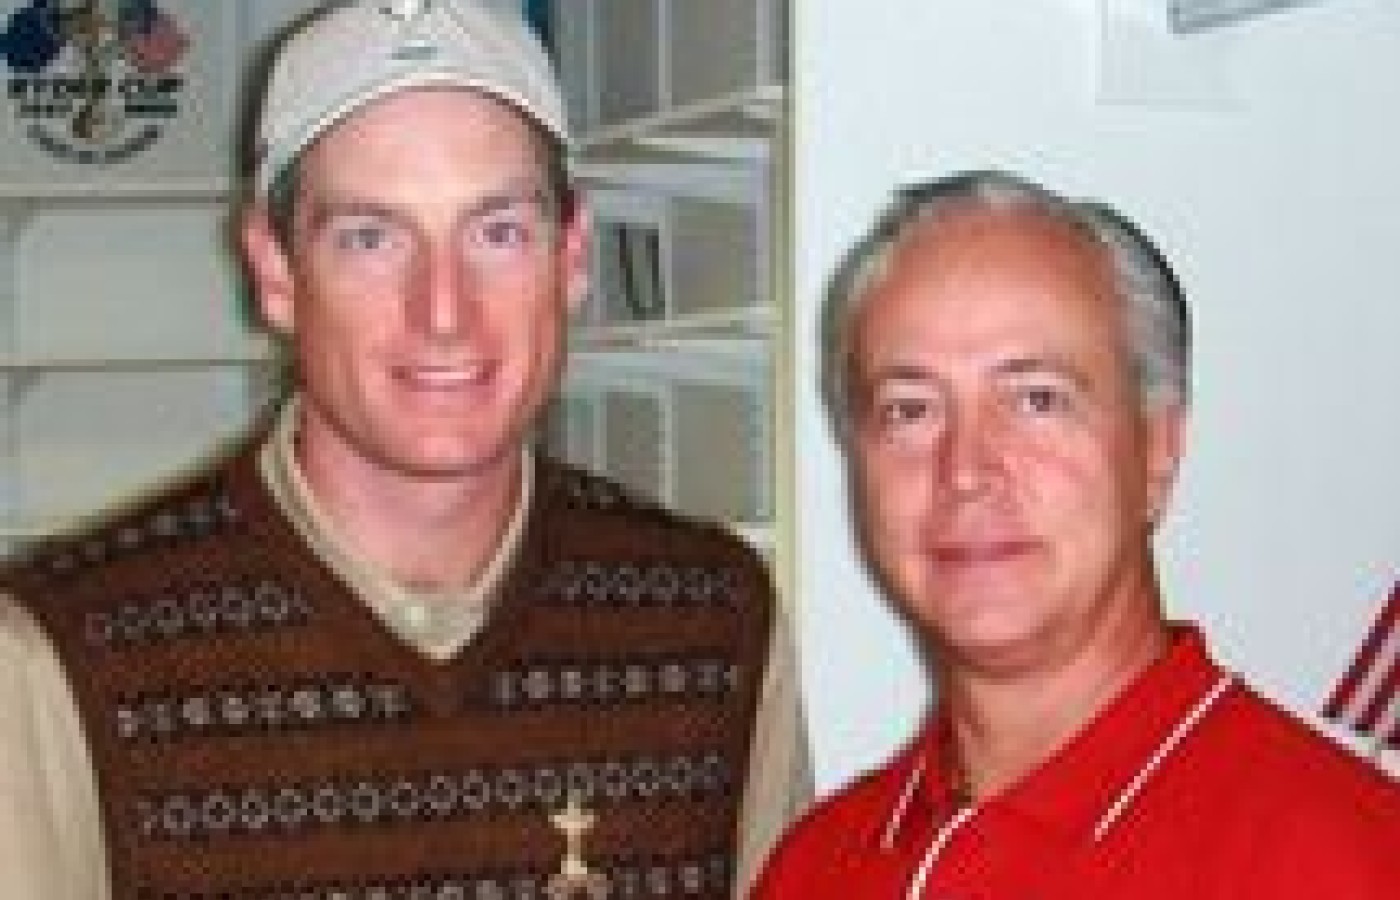 Dr. Tom LaFountain and Jim Furyk.